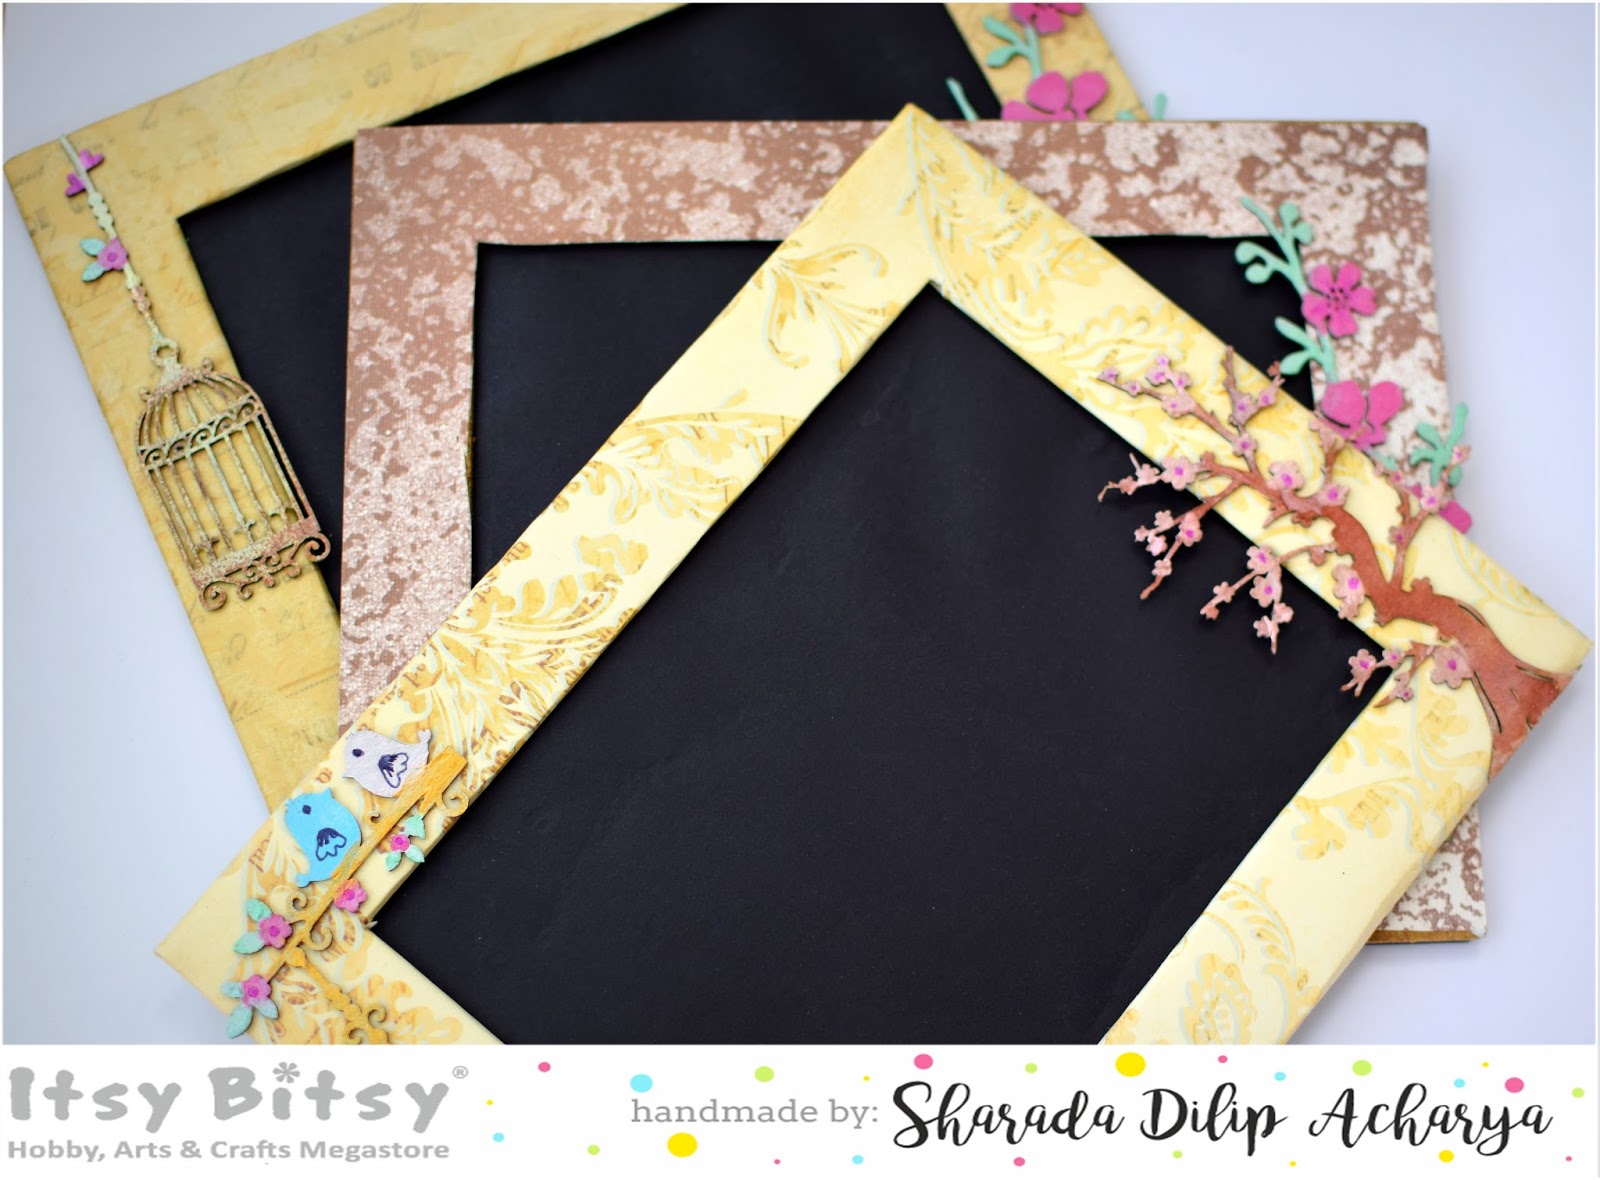 HappyMomentzz crafting by Sharada Dilip: Make your own